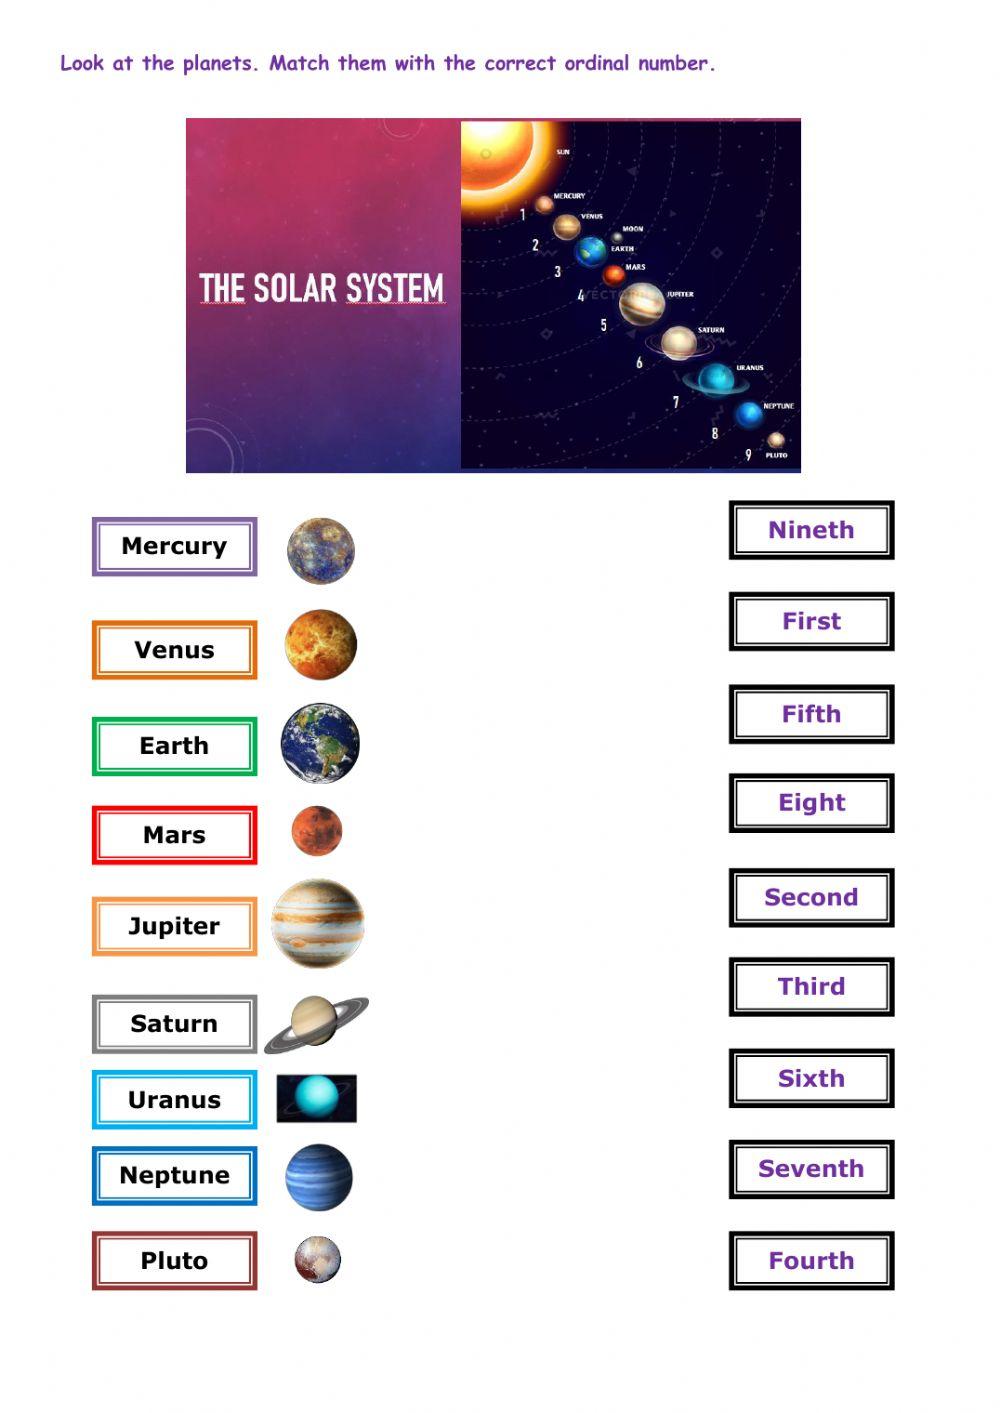 Planets-ordinal numbers